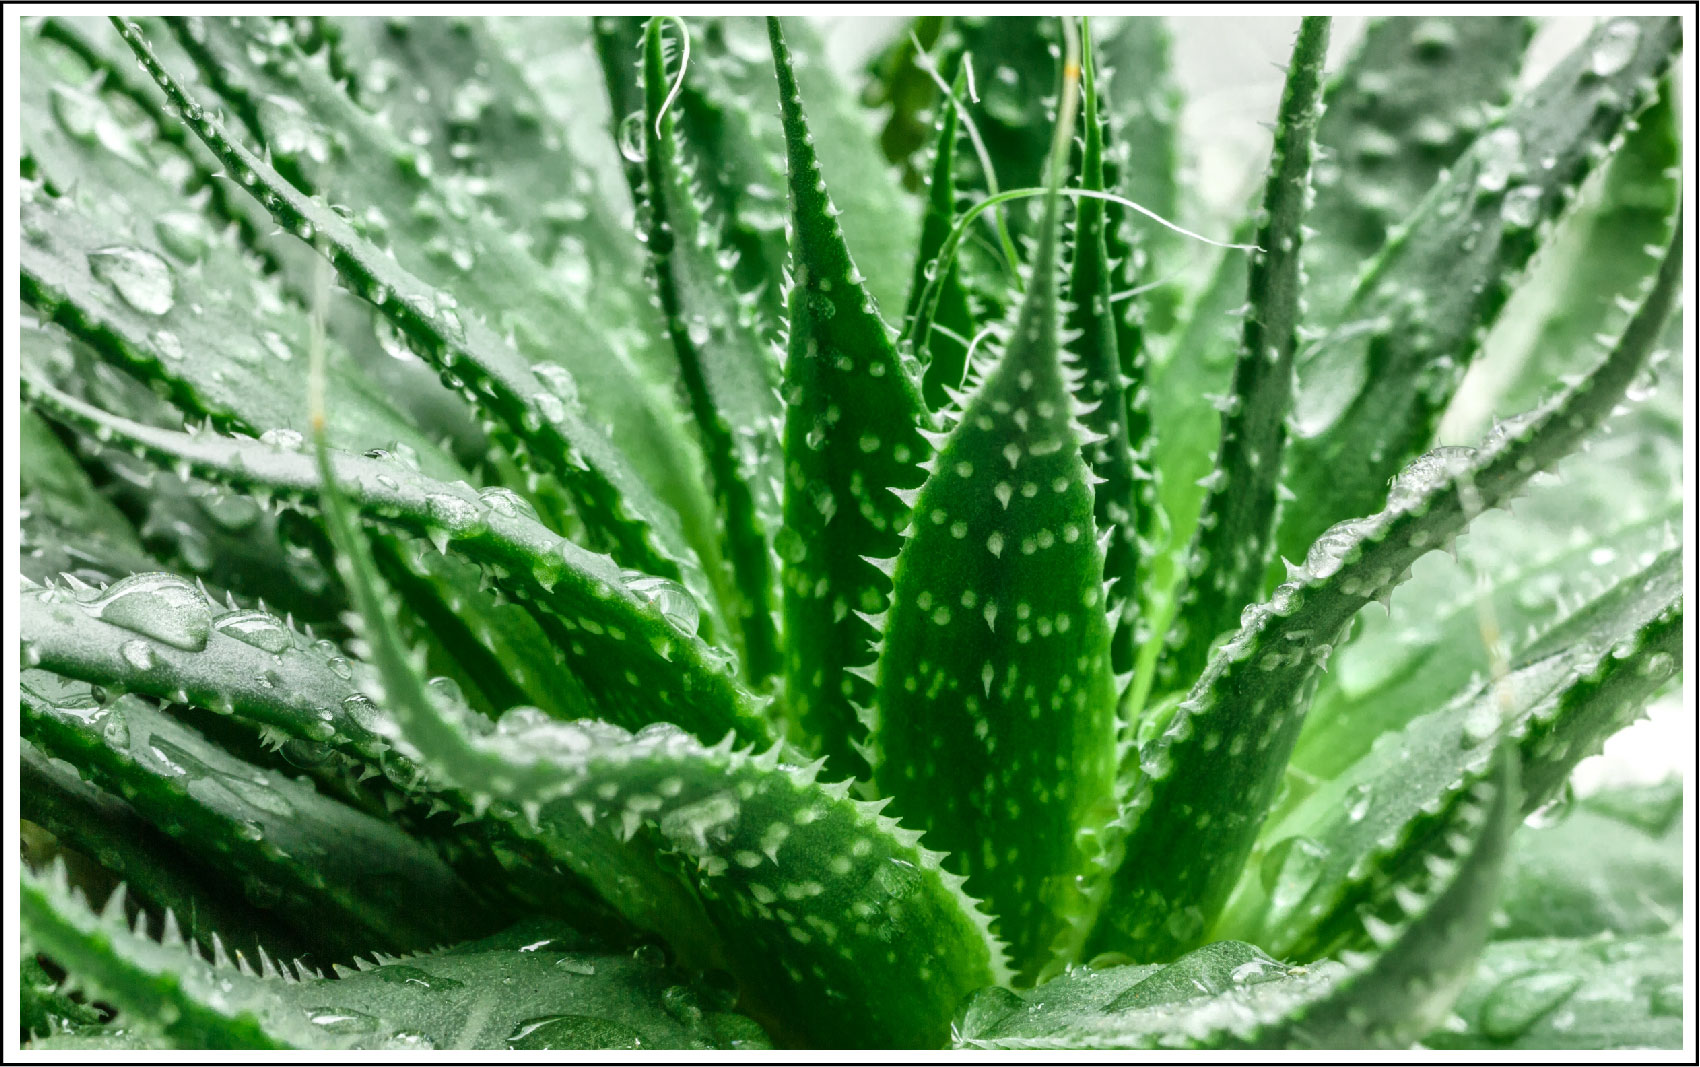 Aloe Vera Water Balances the pH of Your Skin and More!